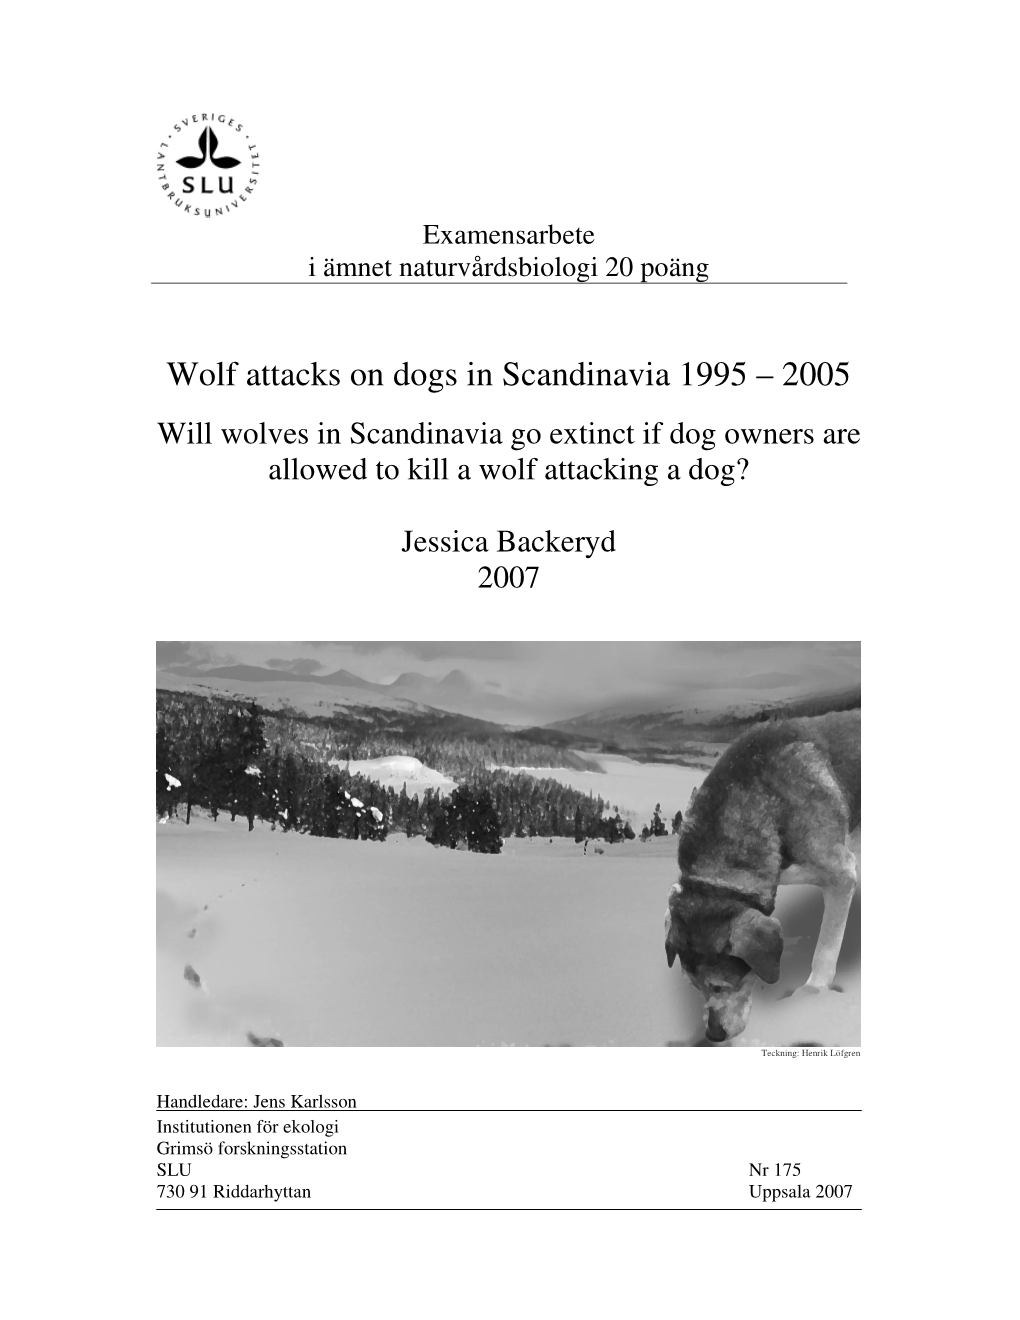 Wolf Attacks on Dogs in Scandinavia 1995 – 2005